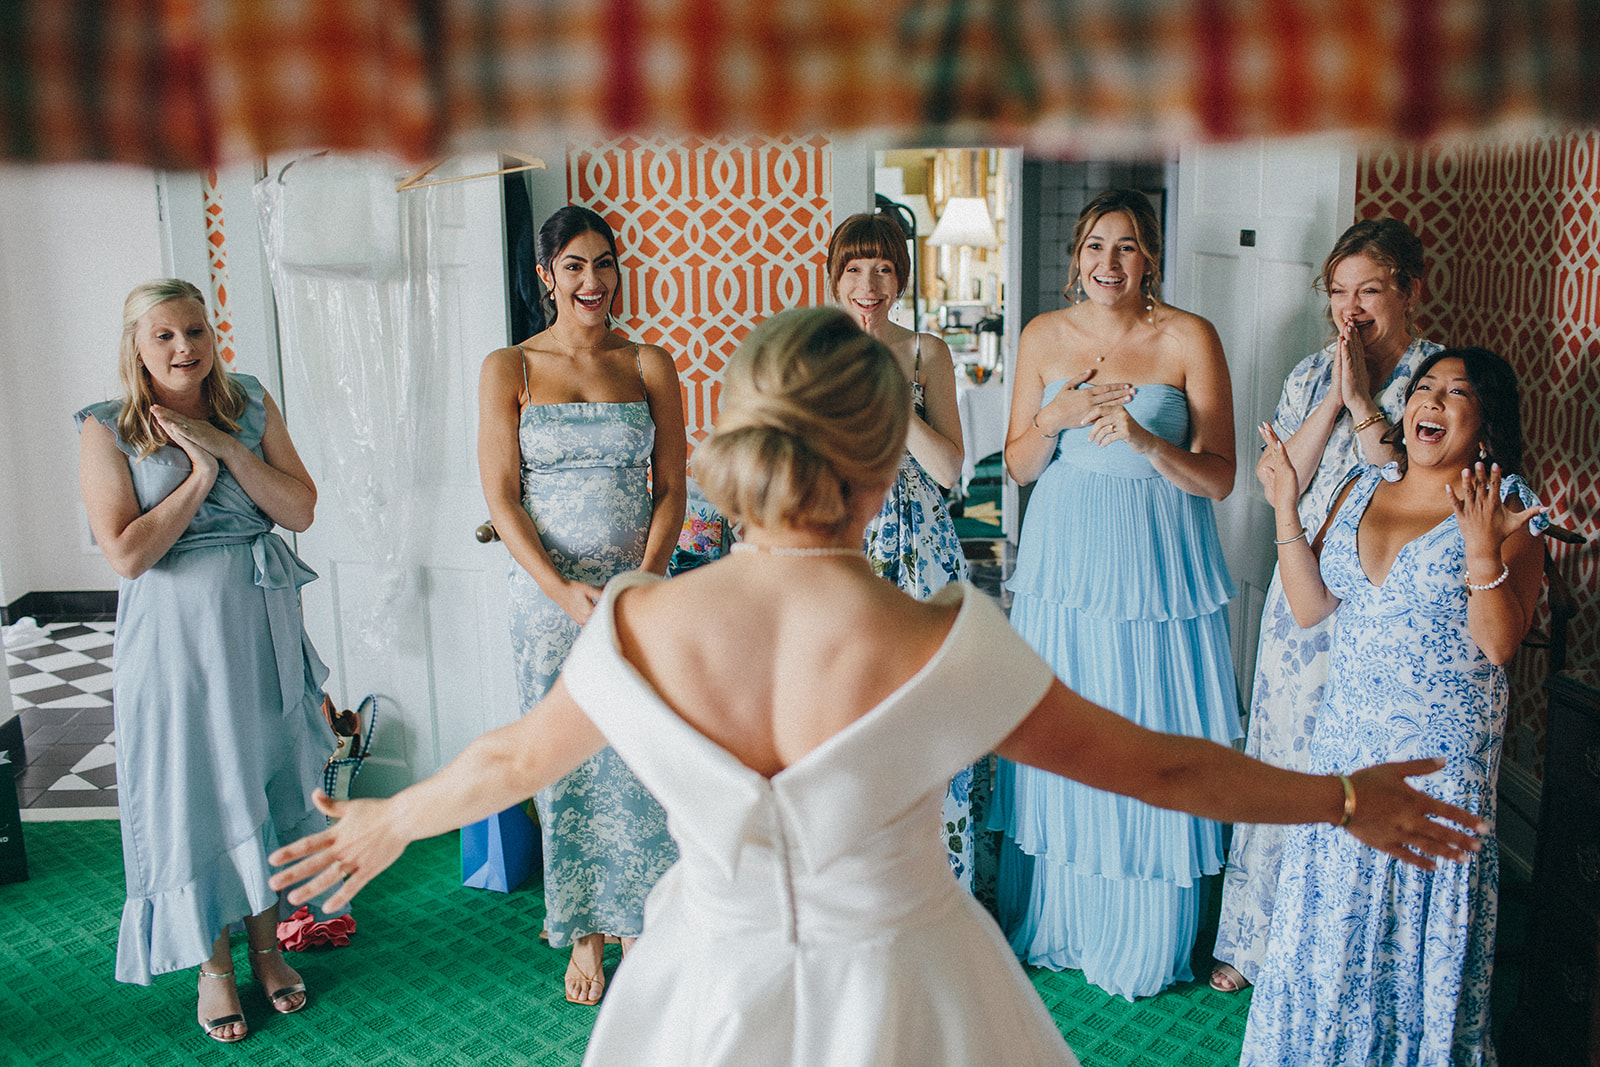 A bride shares an emotional and fun moment with her friends in the Presidents Suite at the Grand Hotel on Mackinac